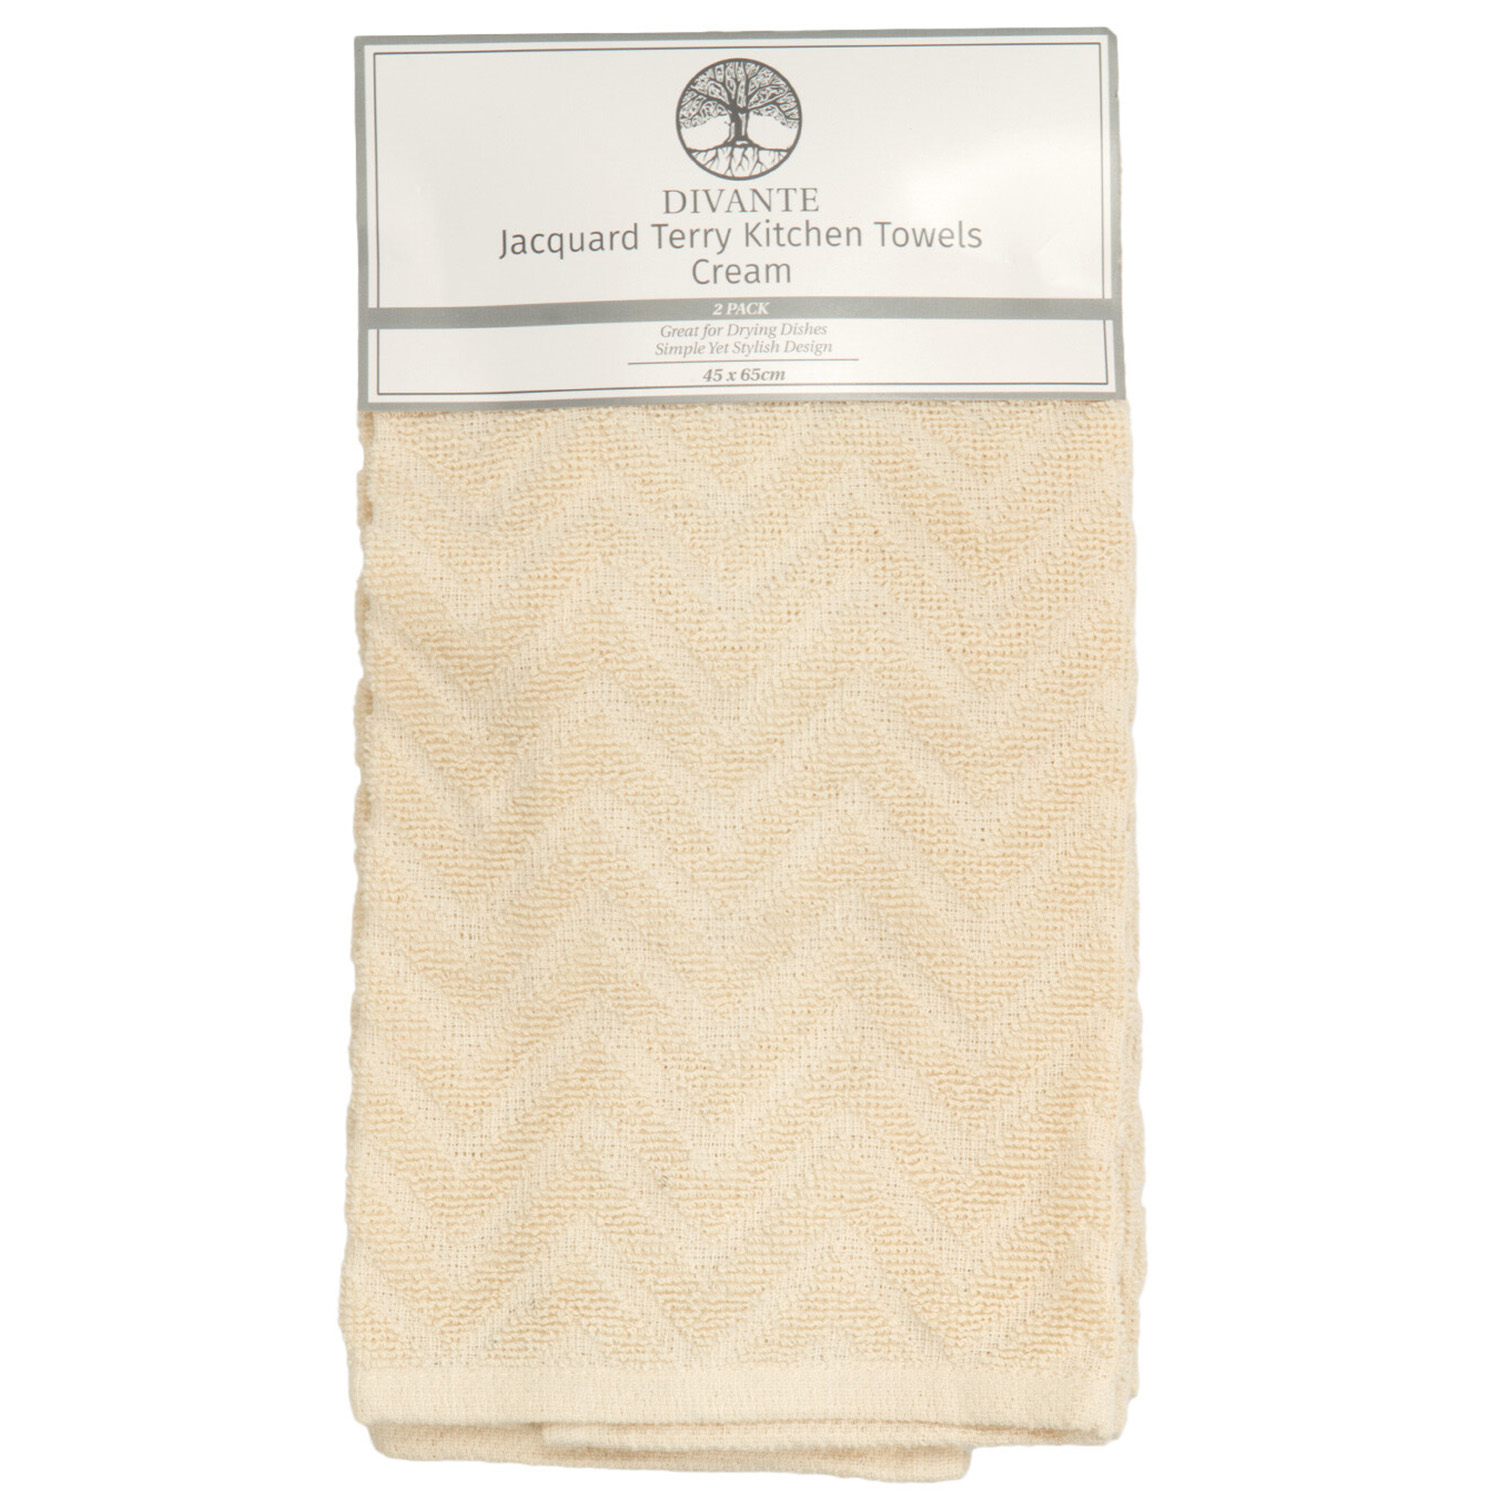 Pack of 2 Jacquard Terry Kitchen Towels - Cream Image 1